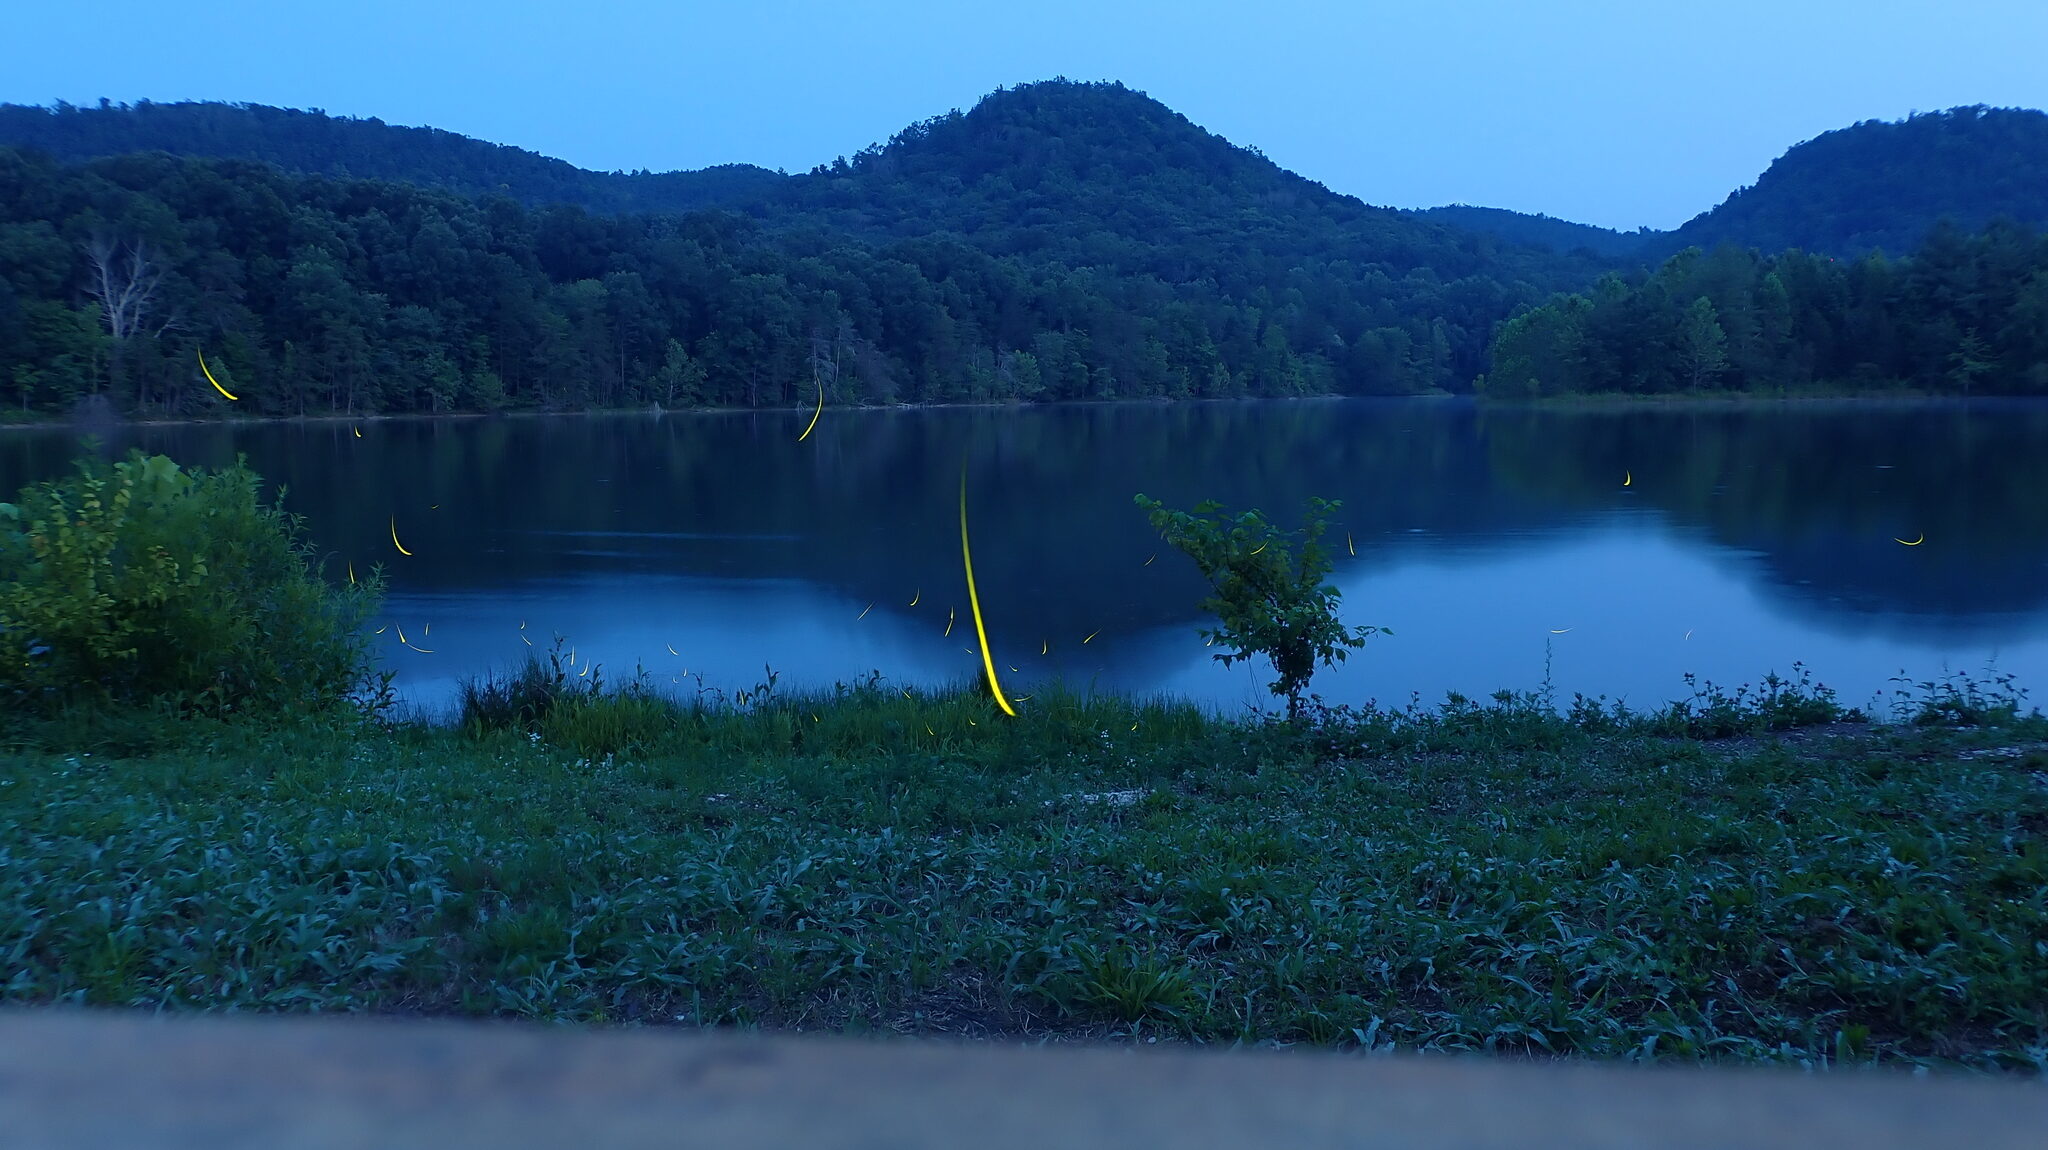 Upward trailing streaks of yellow in the foreground of forested hills and a still pond at dusk.